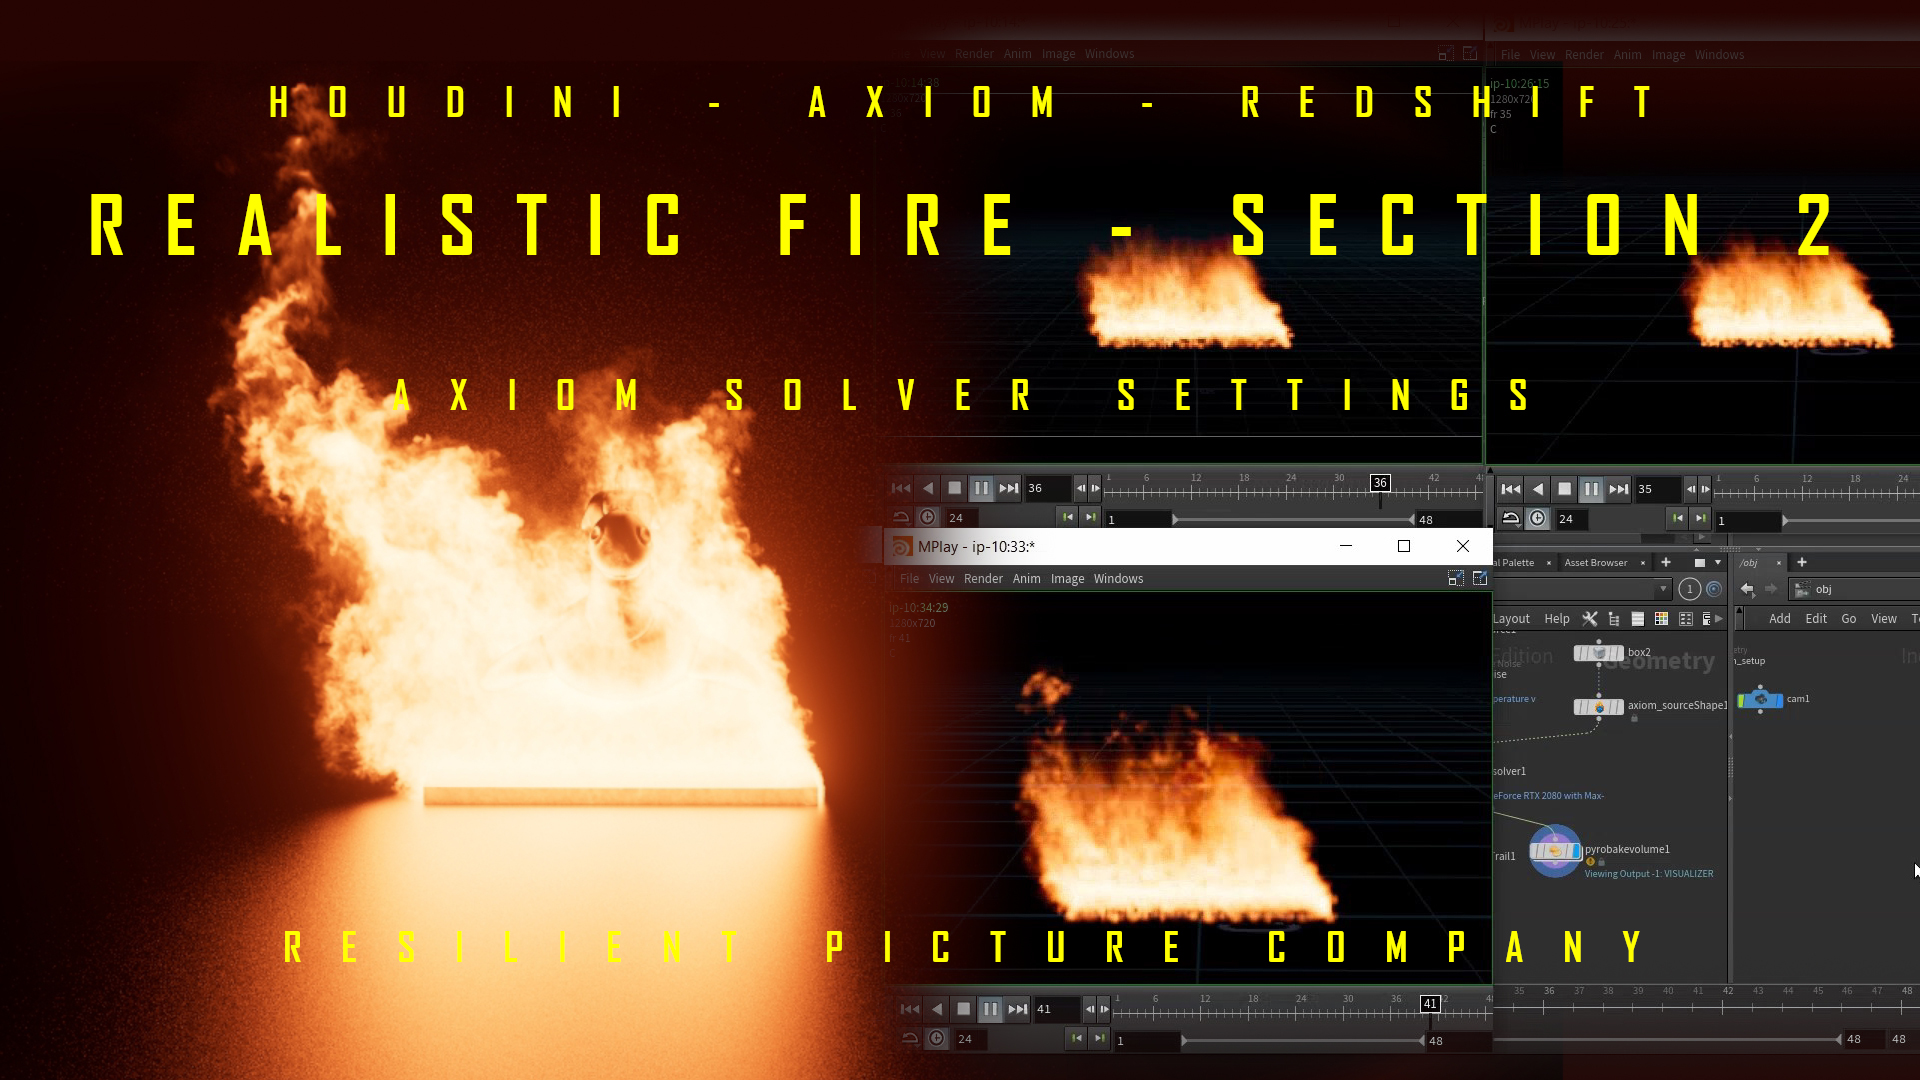 REALISTIC FIRE - SECTION 2